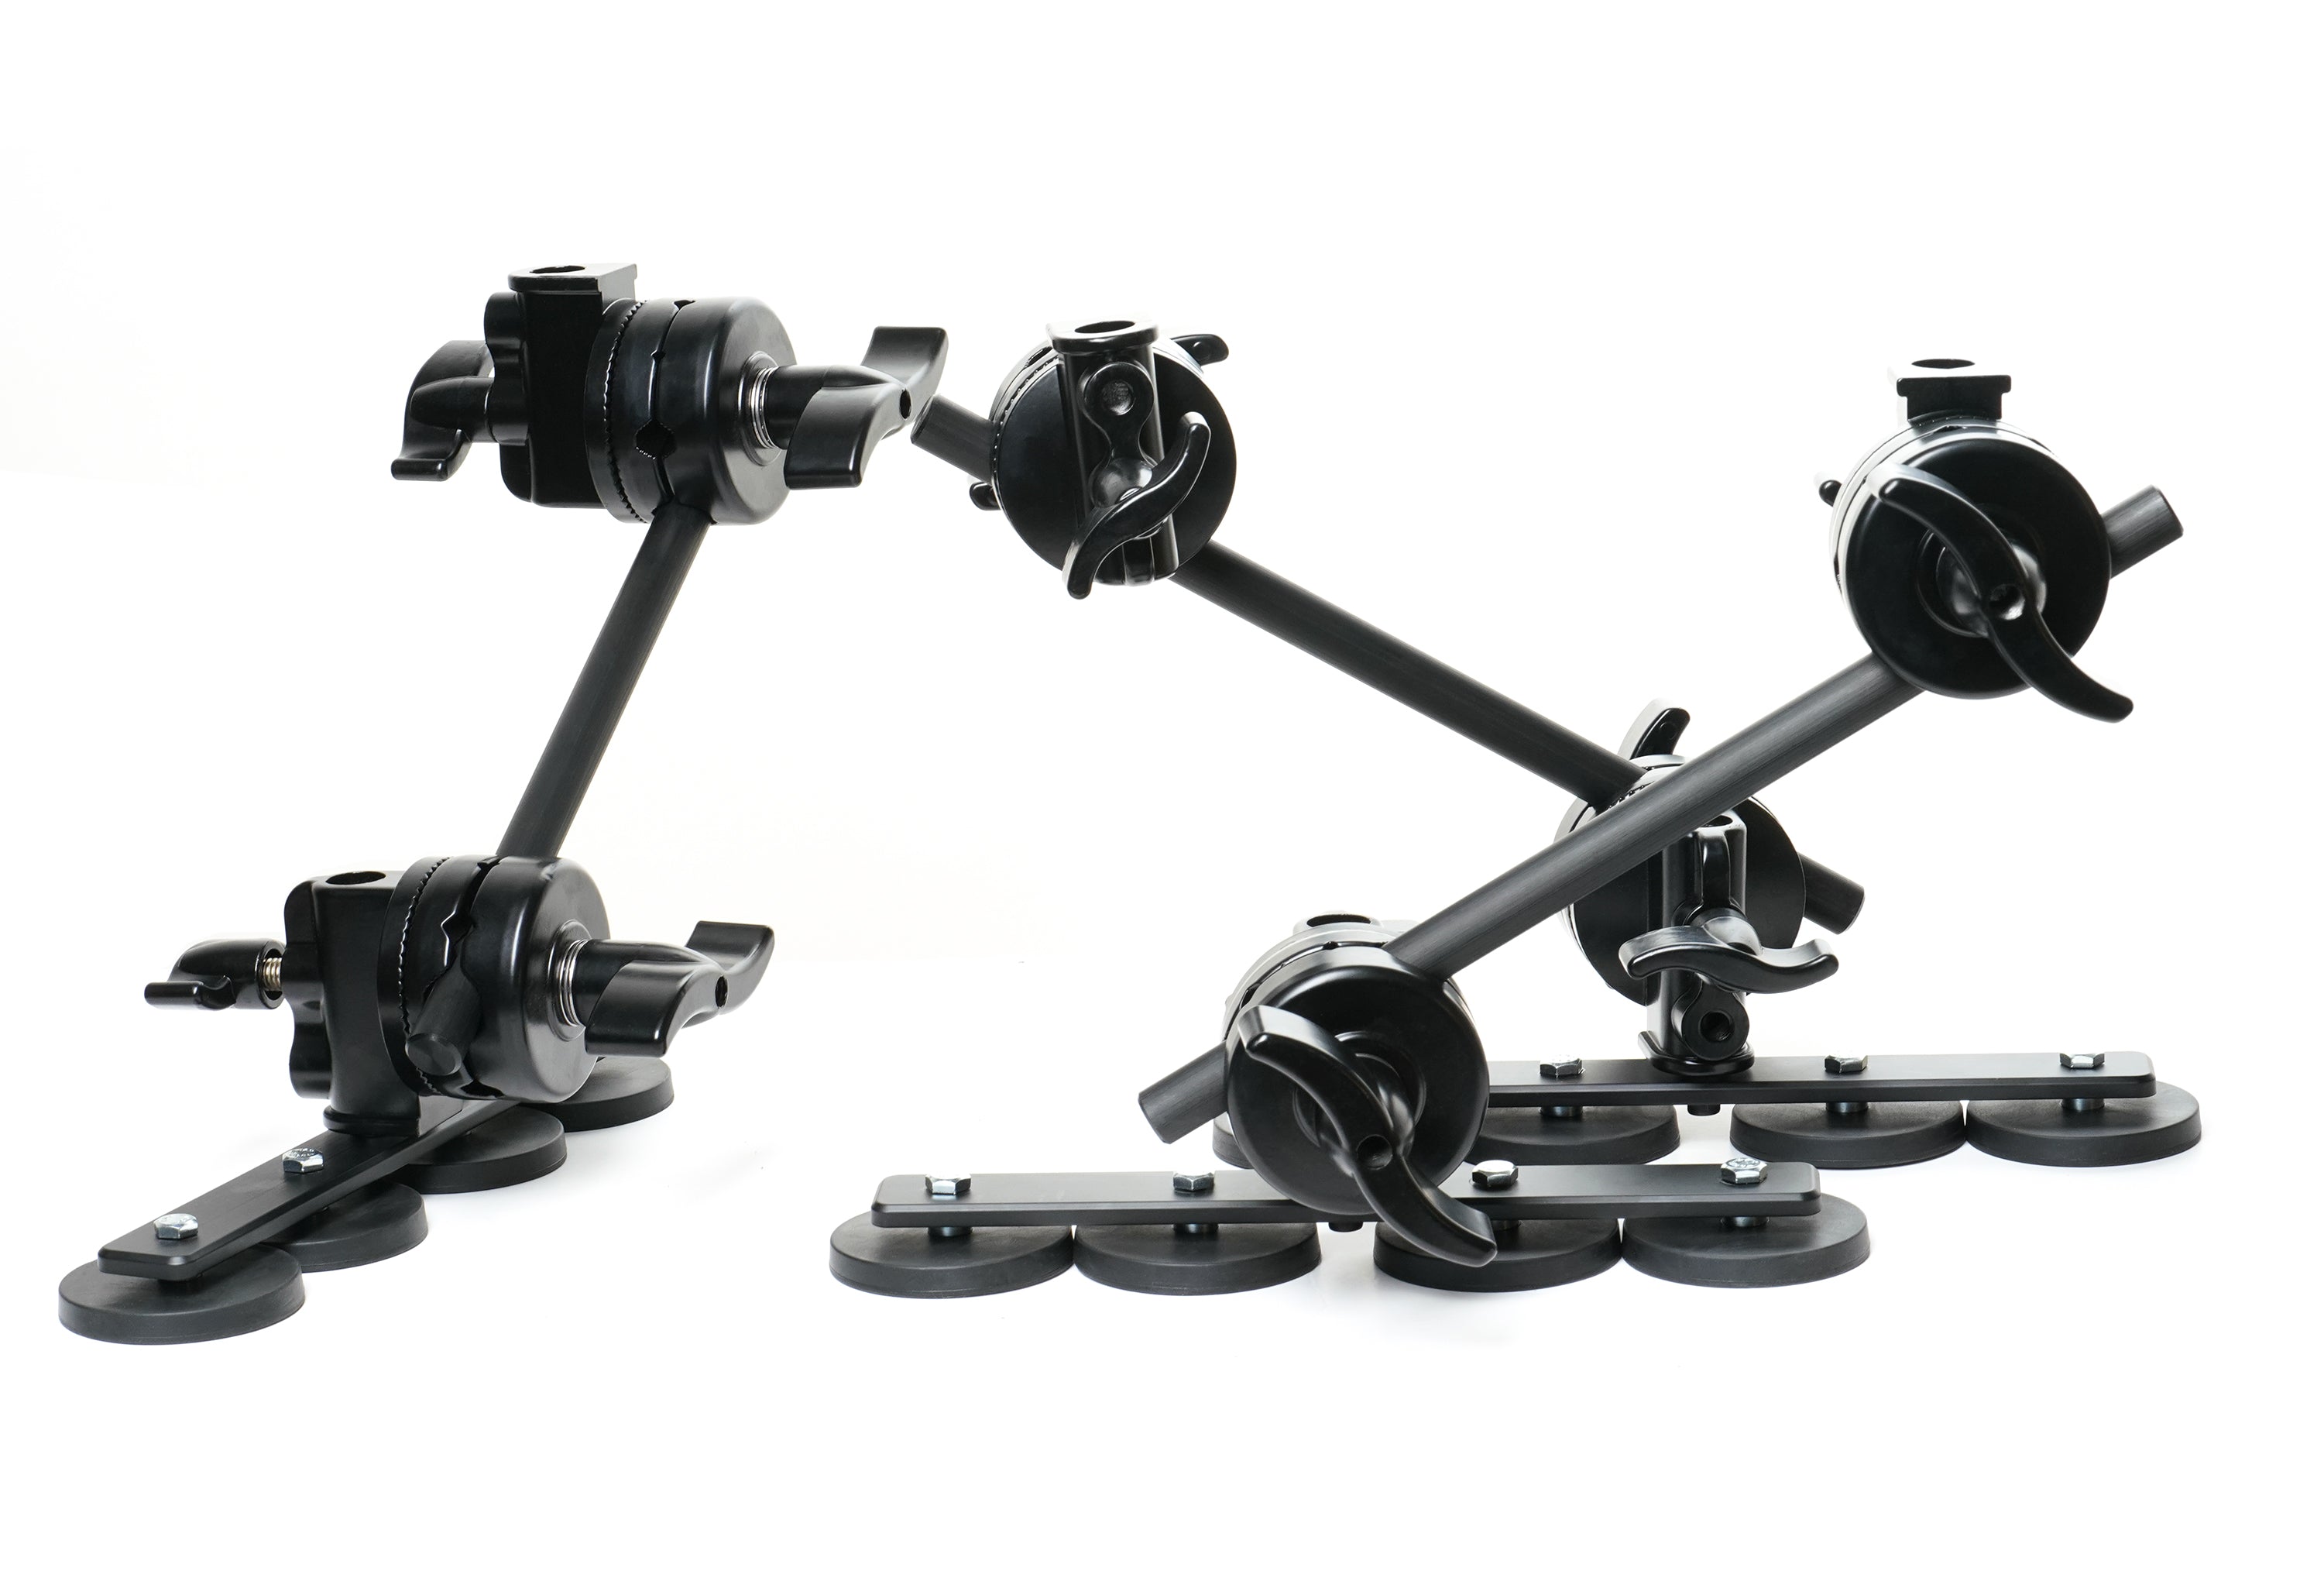 Articulating Triple Magnet Arms with Grip Heads (Set of 3 Arms)